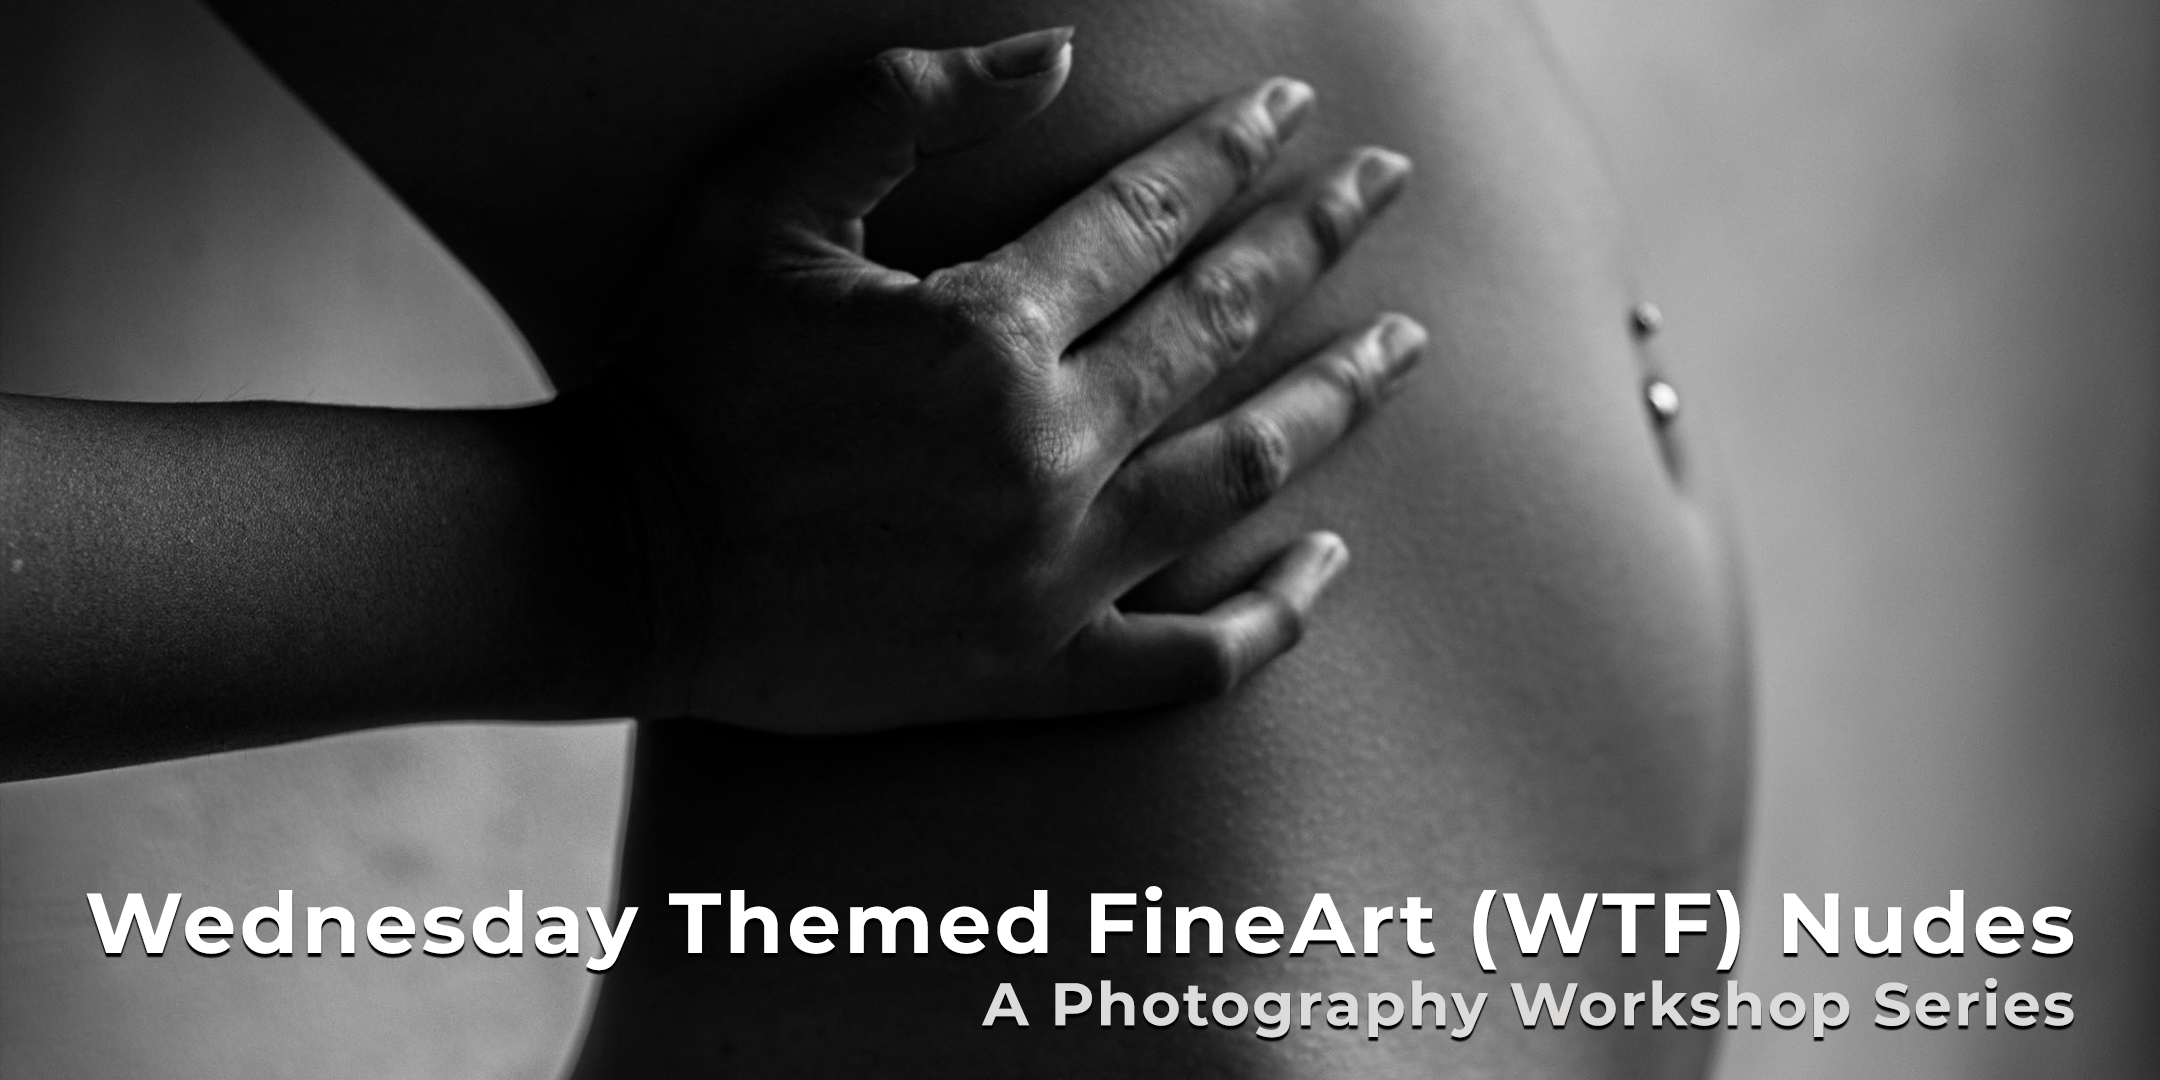 Wednesday Themed FineArt (WTF) Nudes - A Photography Workshop Series